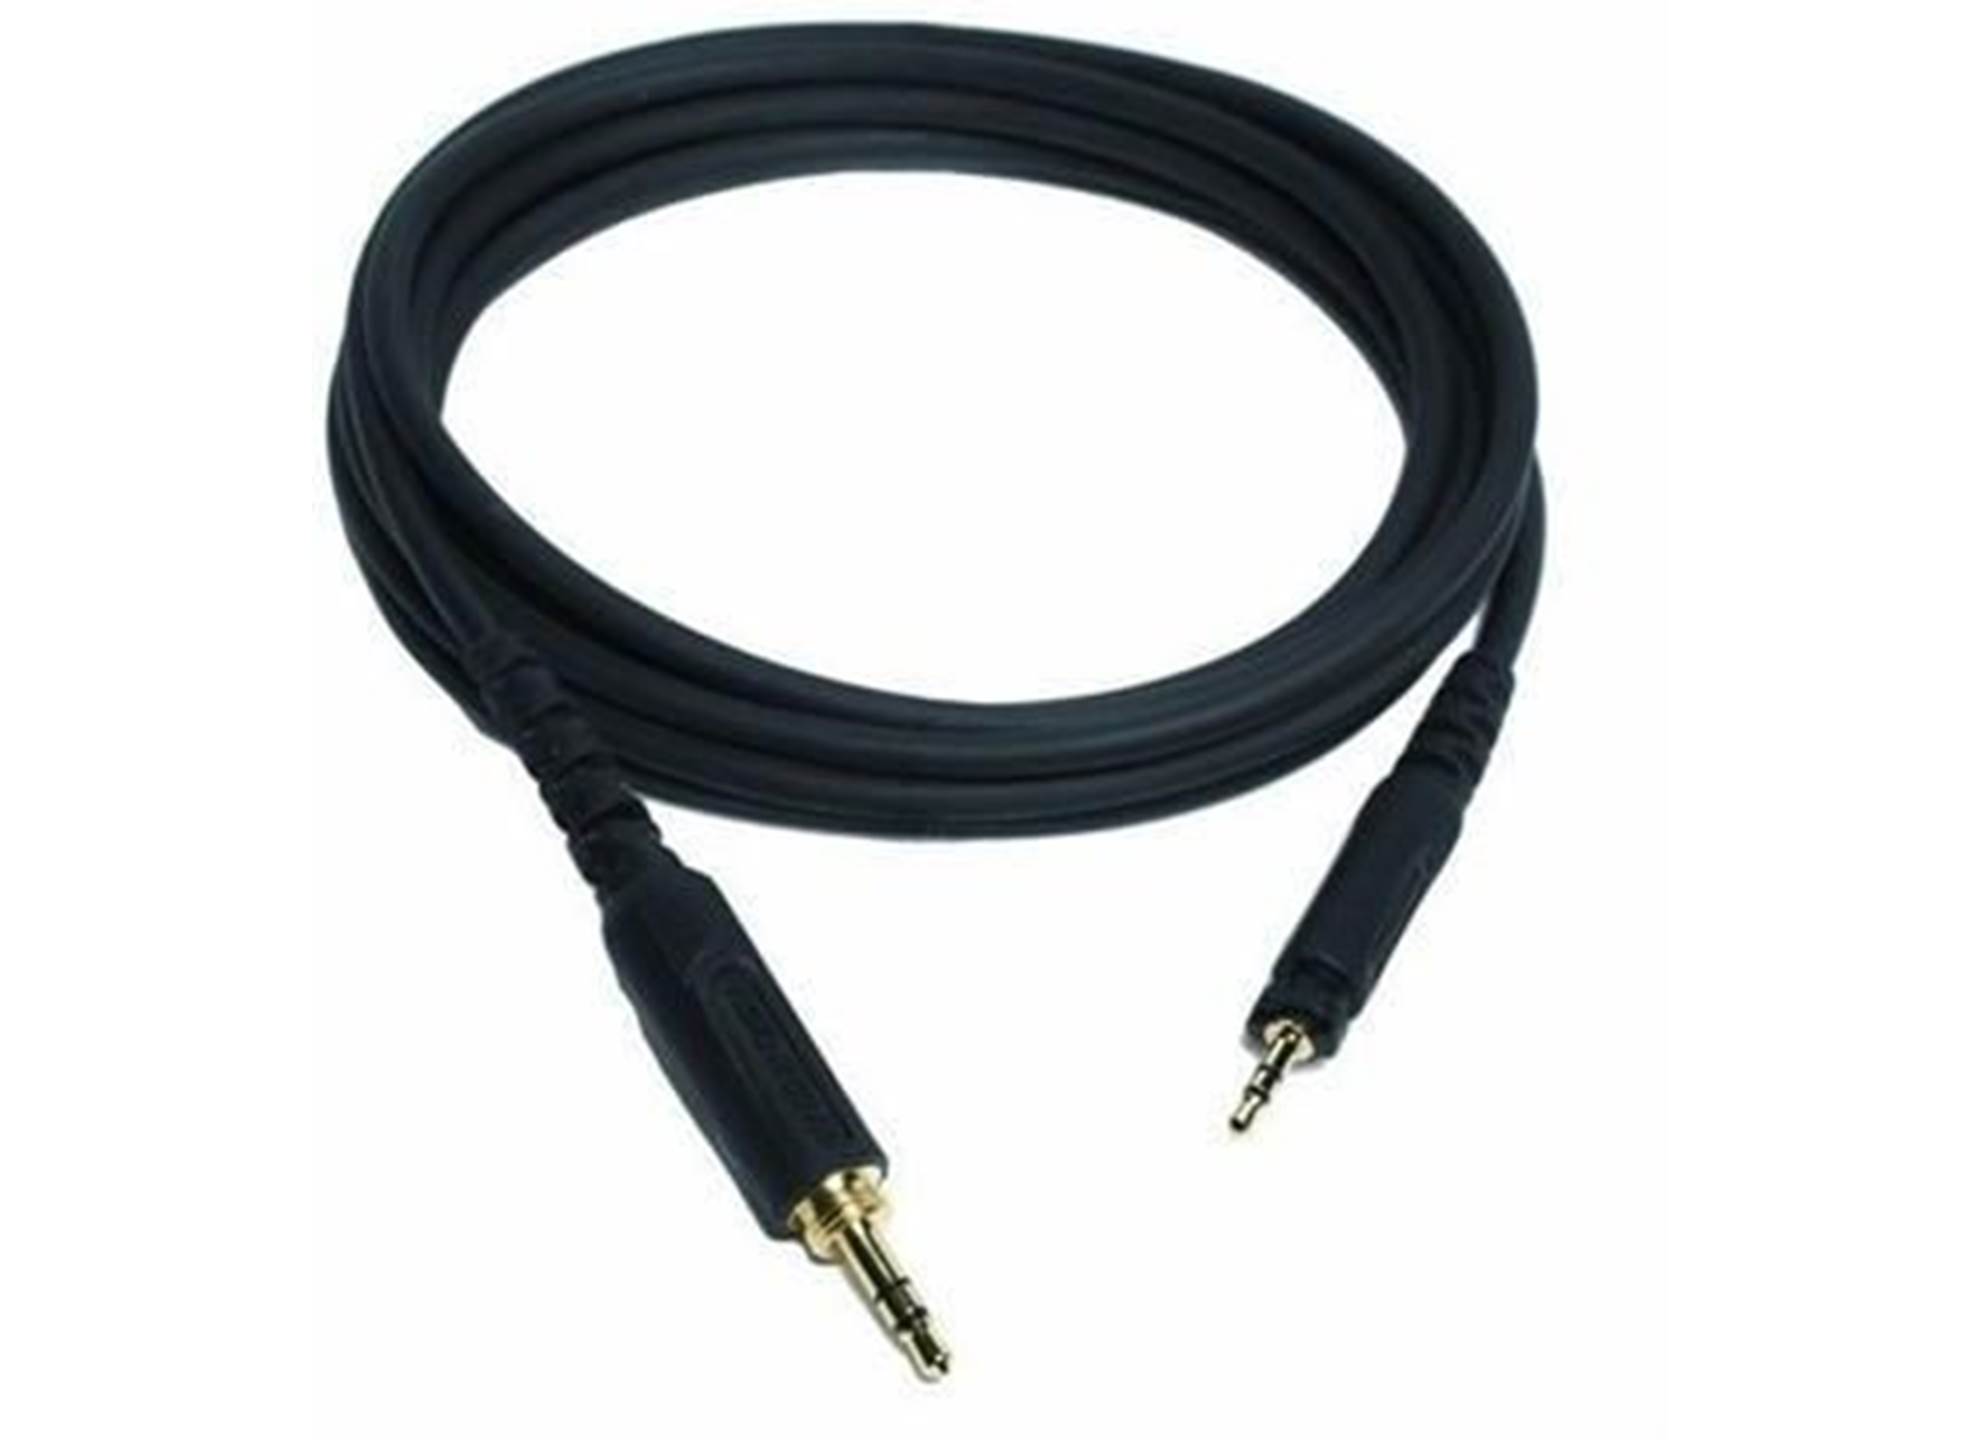 HPASCA1 straight cable for SRH-440/840/750DJ